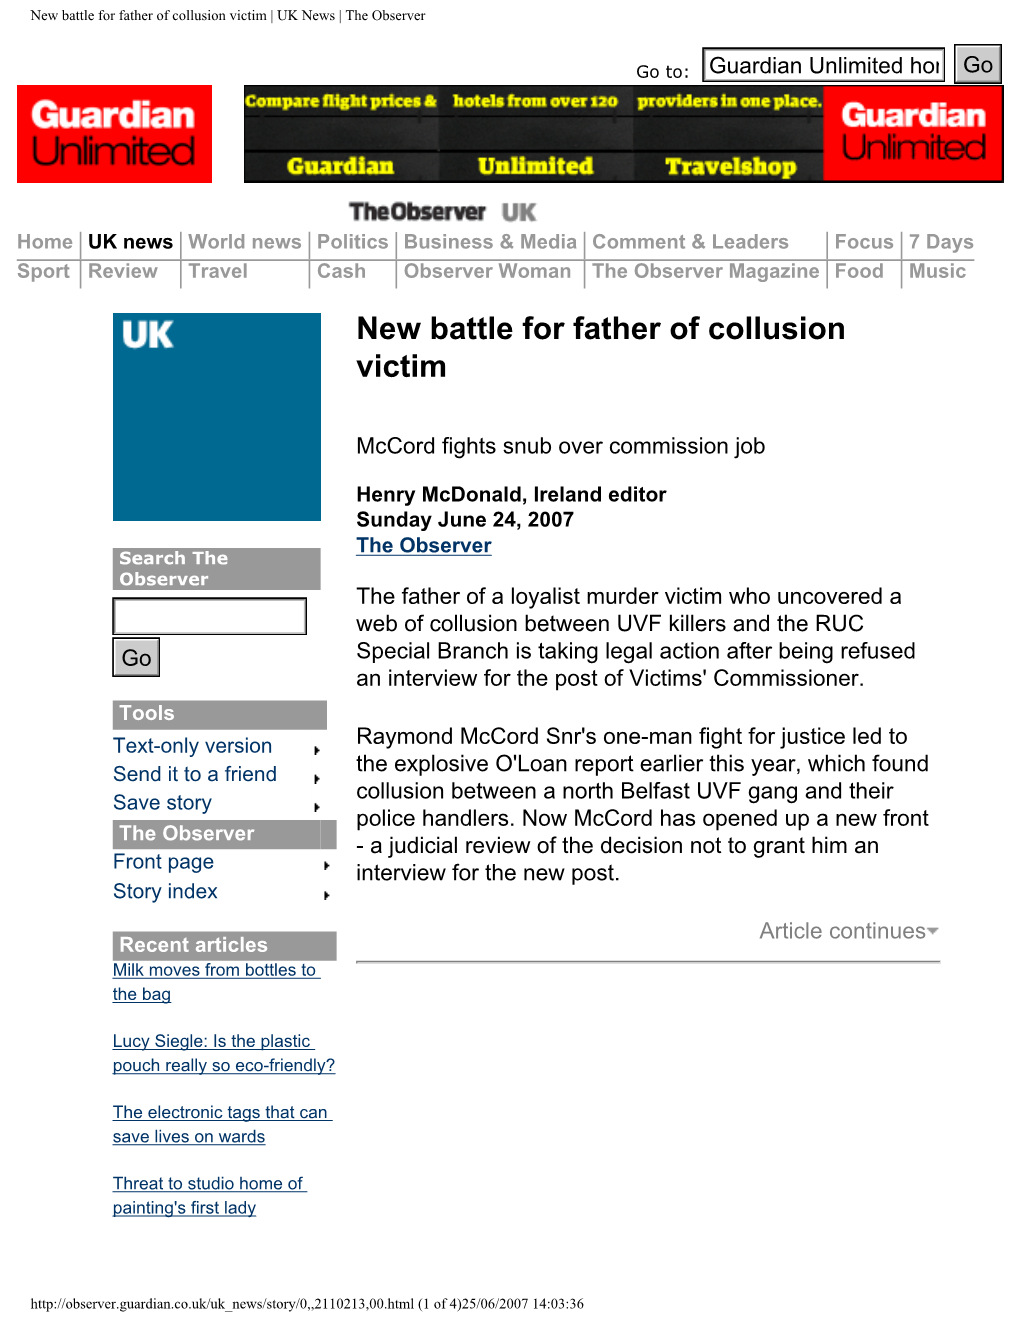 New Battle for Father of Collusion Victim | UK News | the Observer